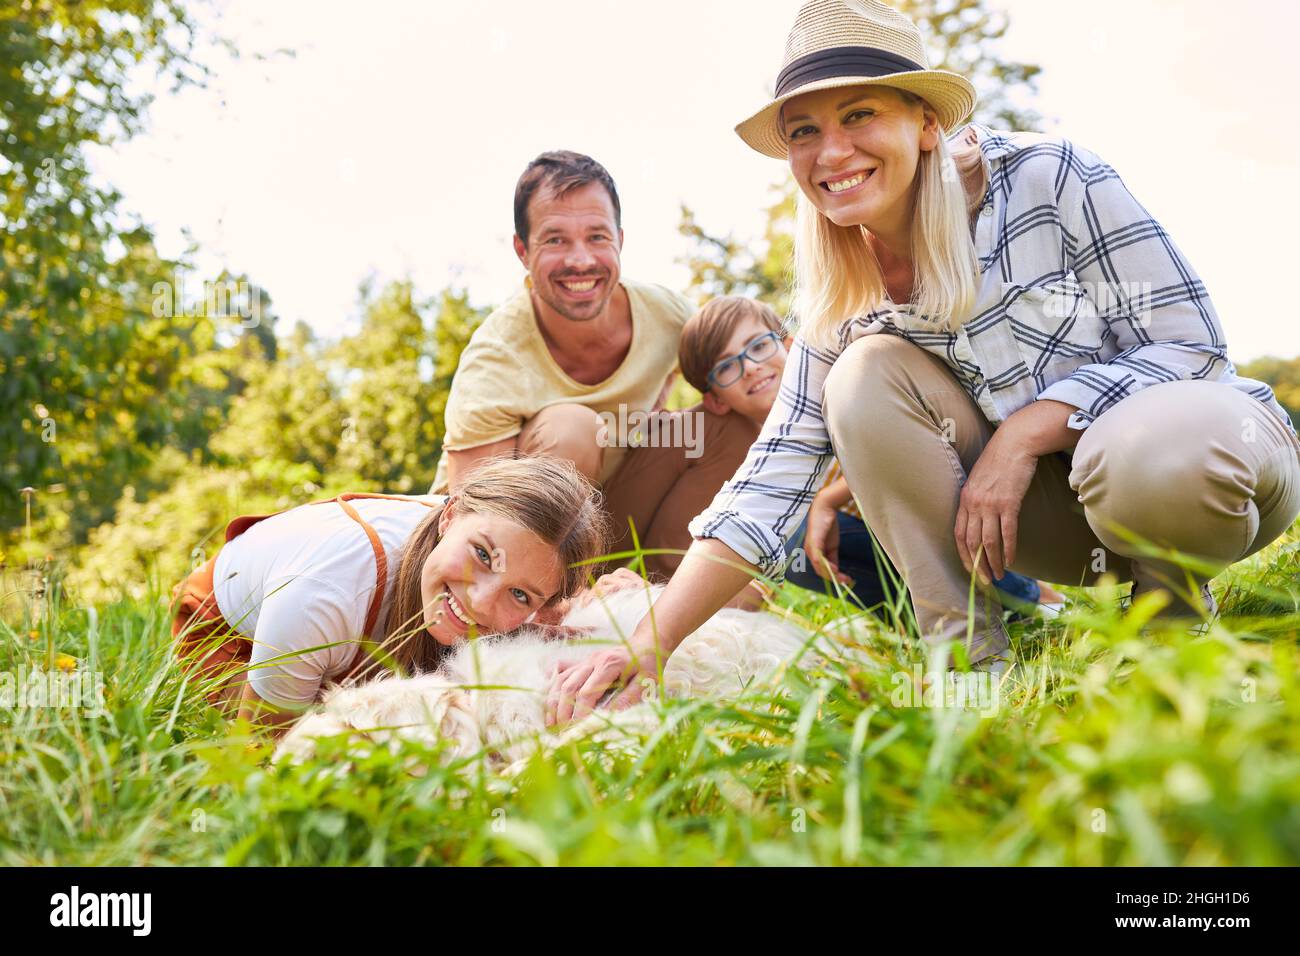 Happy family with two children stroking the dog together in nature Stock Photo